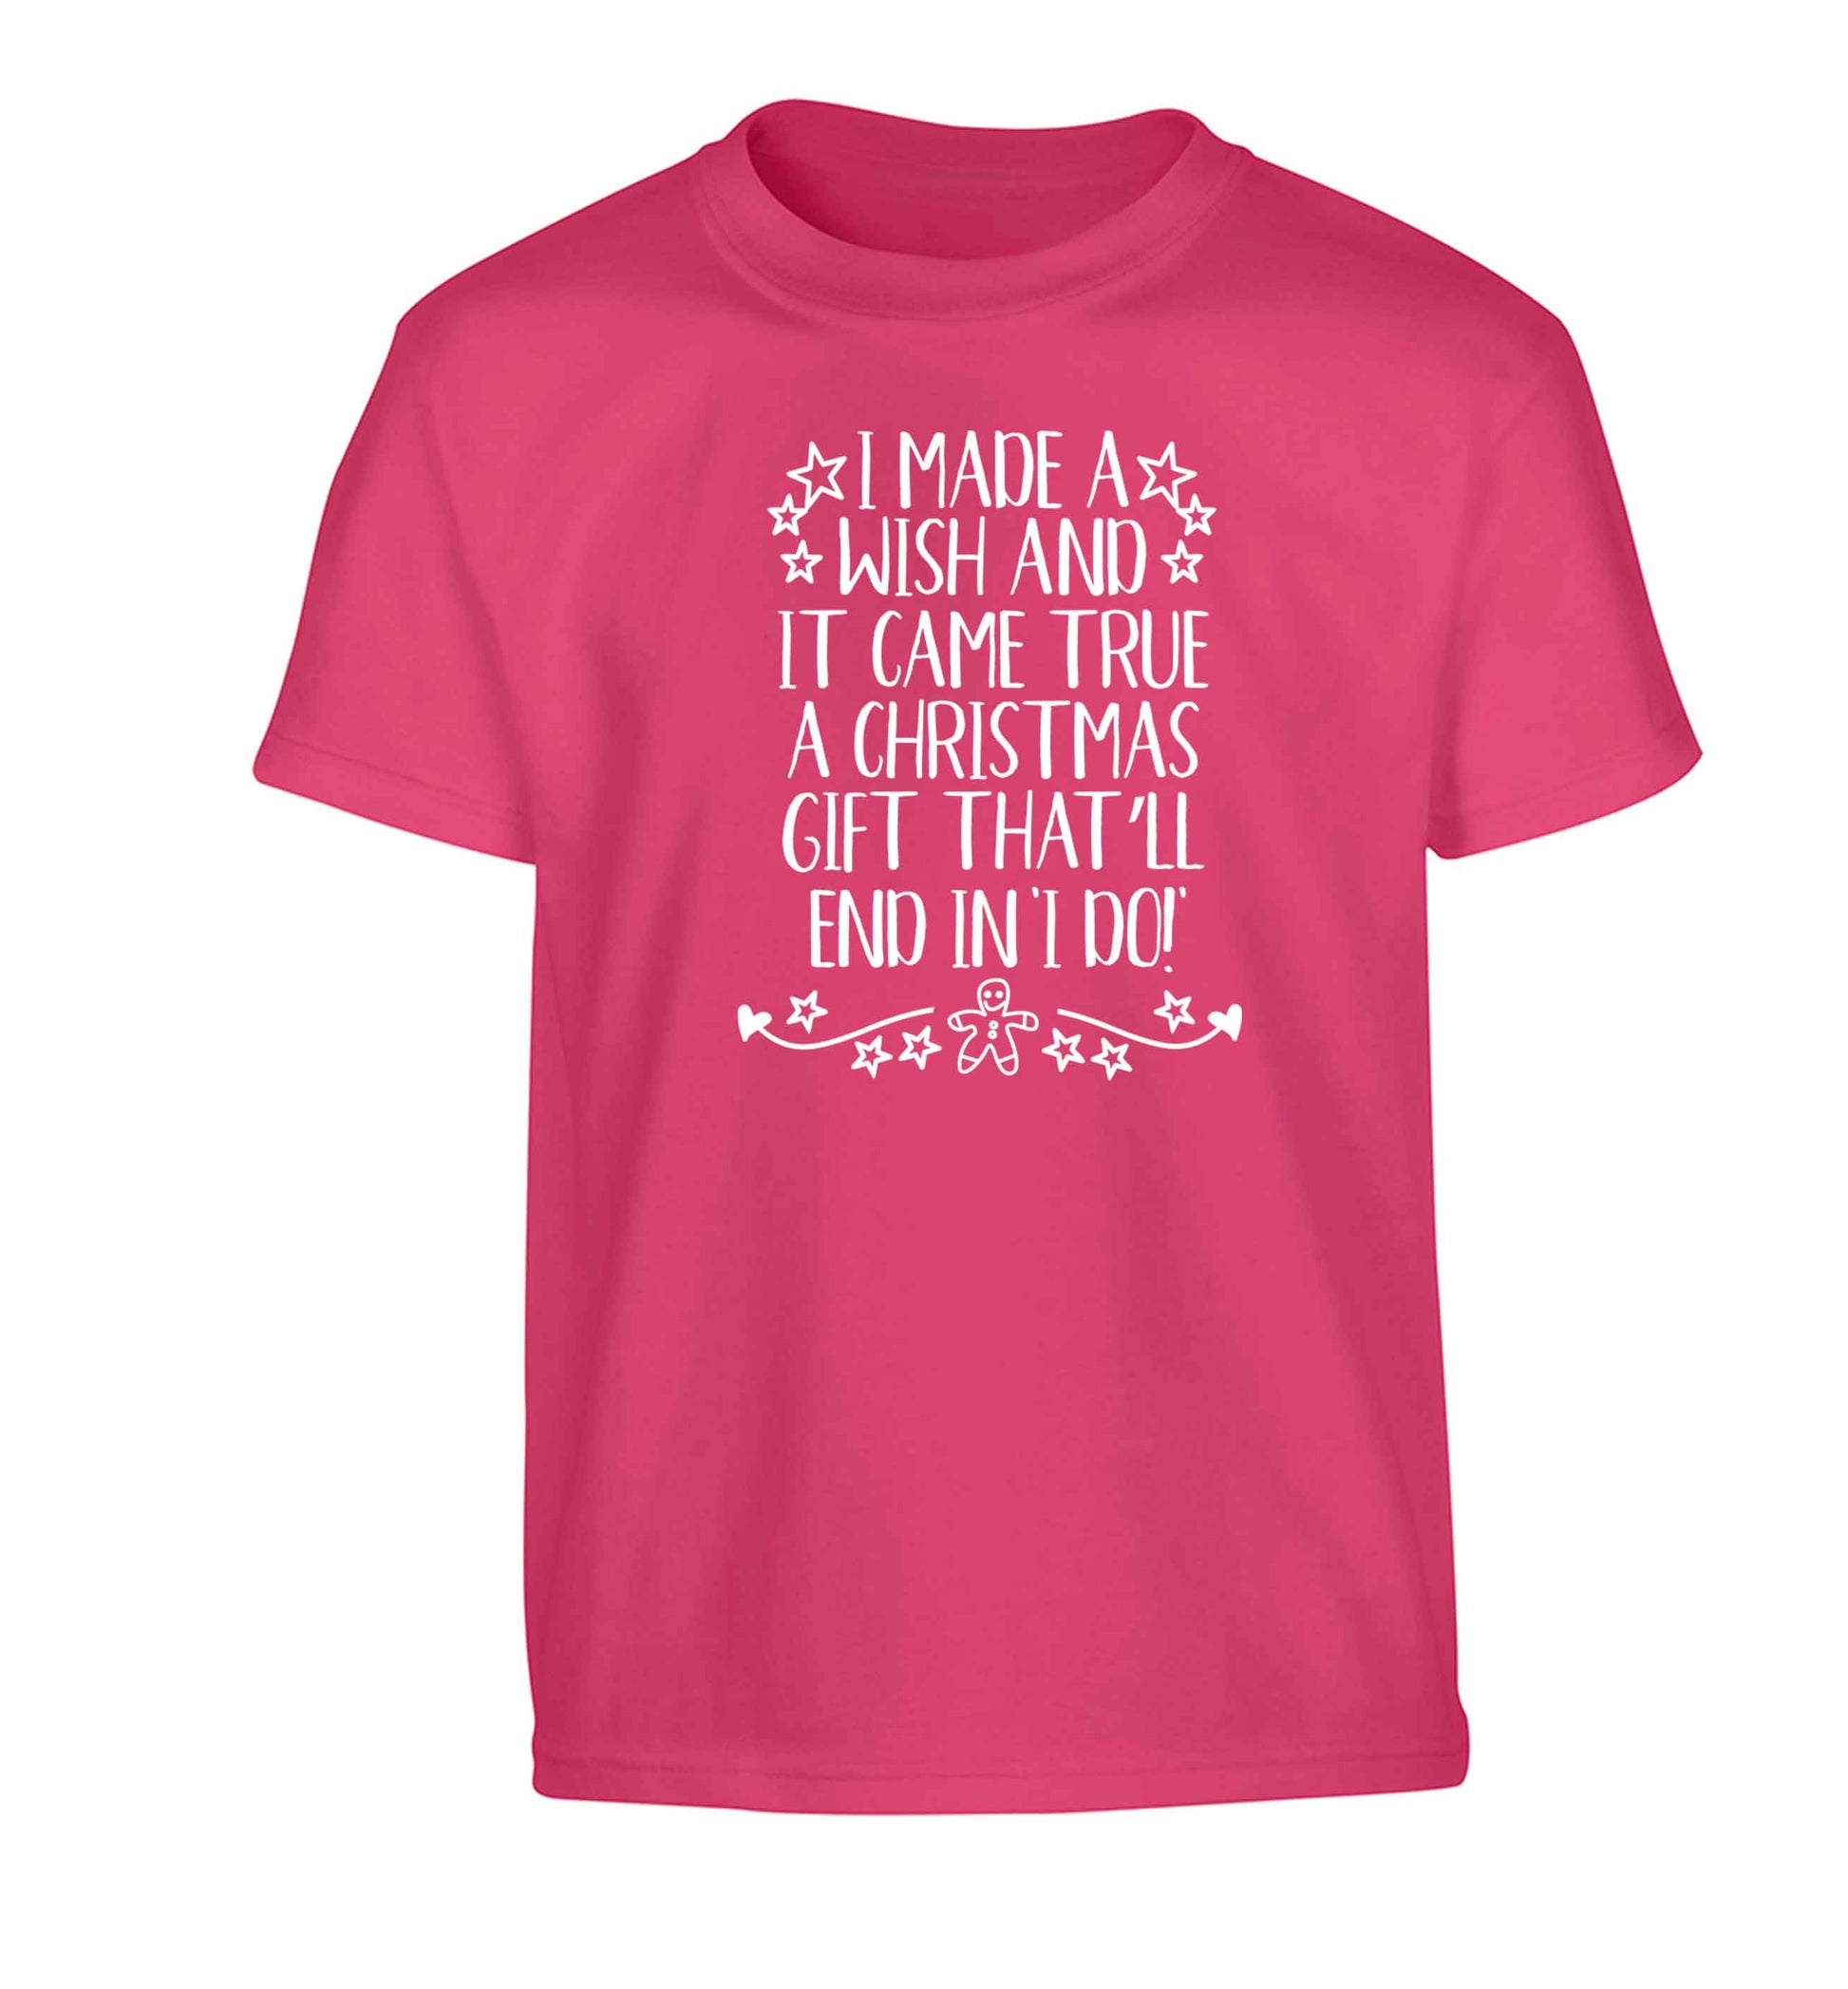 I made a wish and it came true a Christmas gift that'll end in 'I do' Children's pink Tshirt 12-13 Years